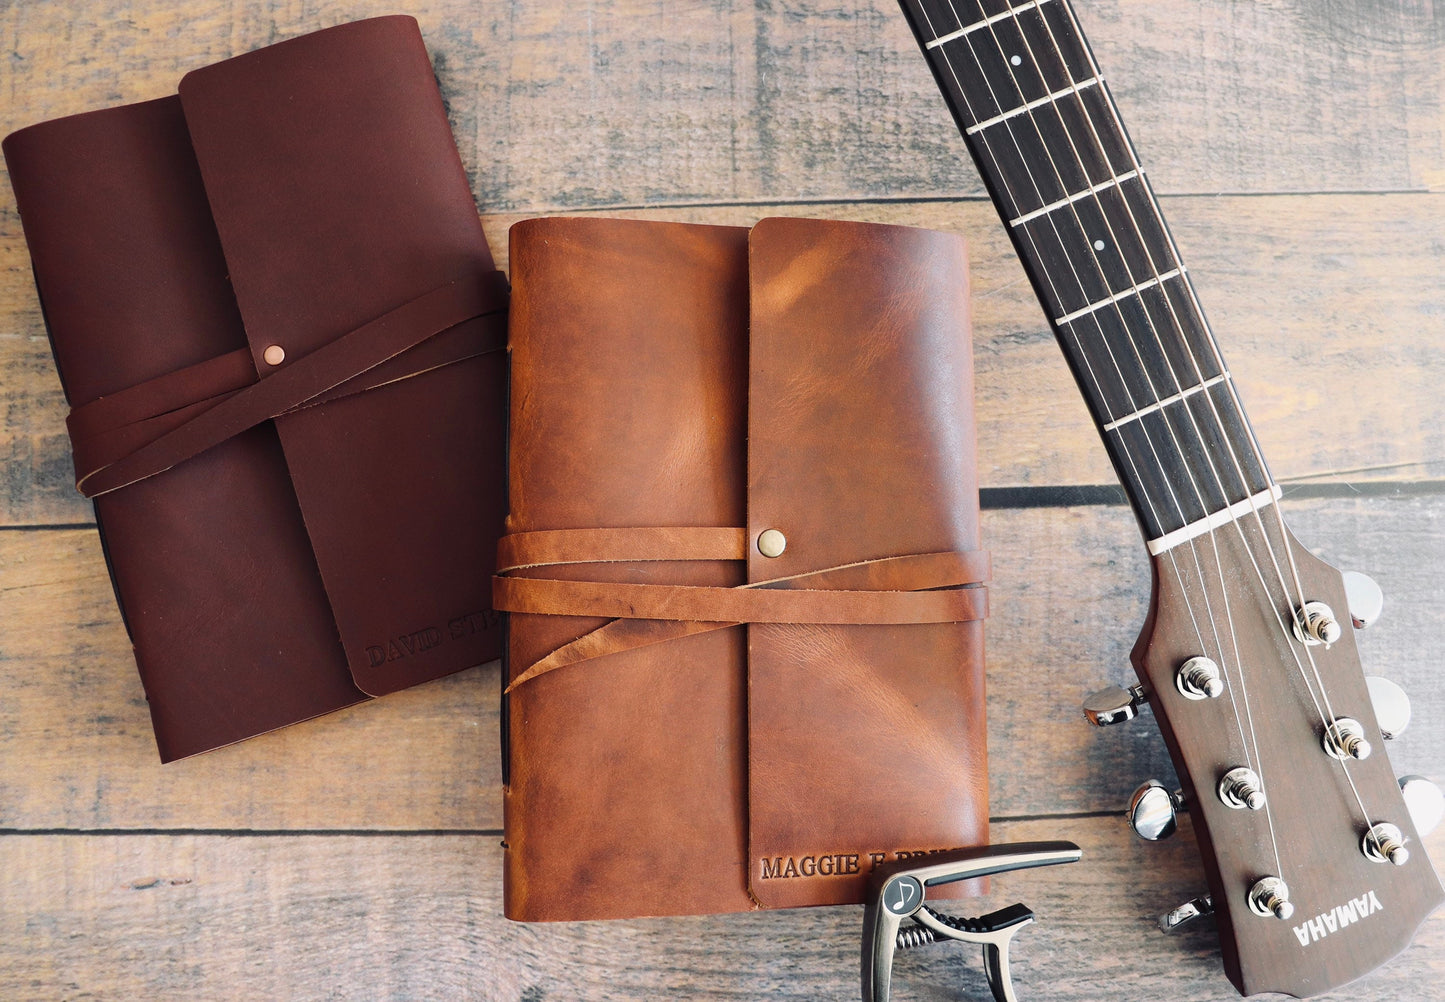 Leather Music Journal, Rustic Songwriting Book, Personalized Gift for Musicians, Songwriters and Composers, Sewn Bound in Full Grain Leather